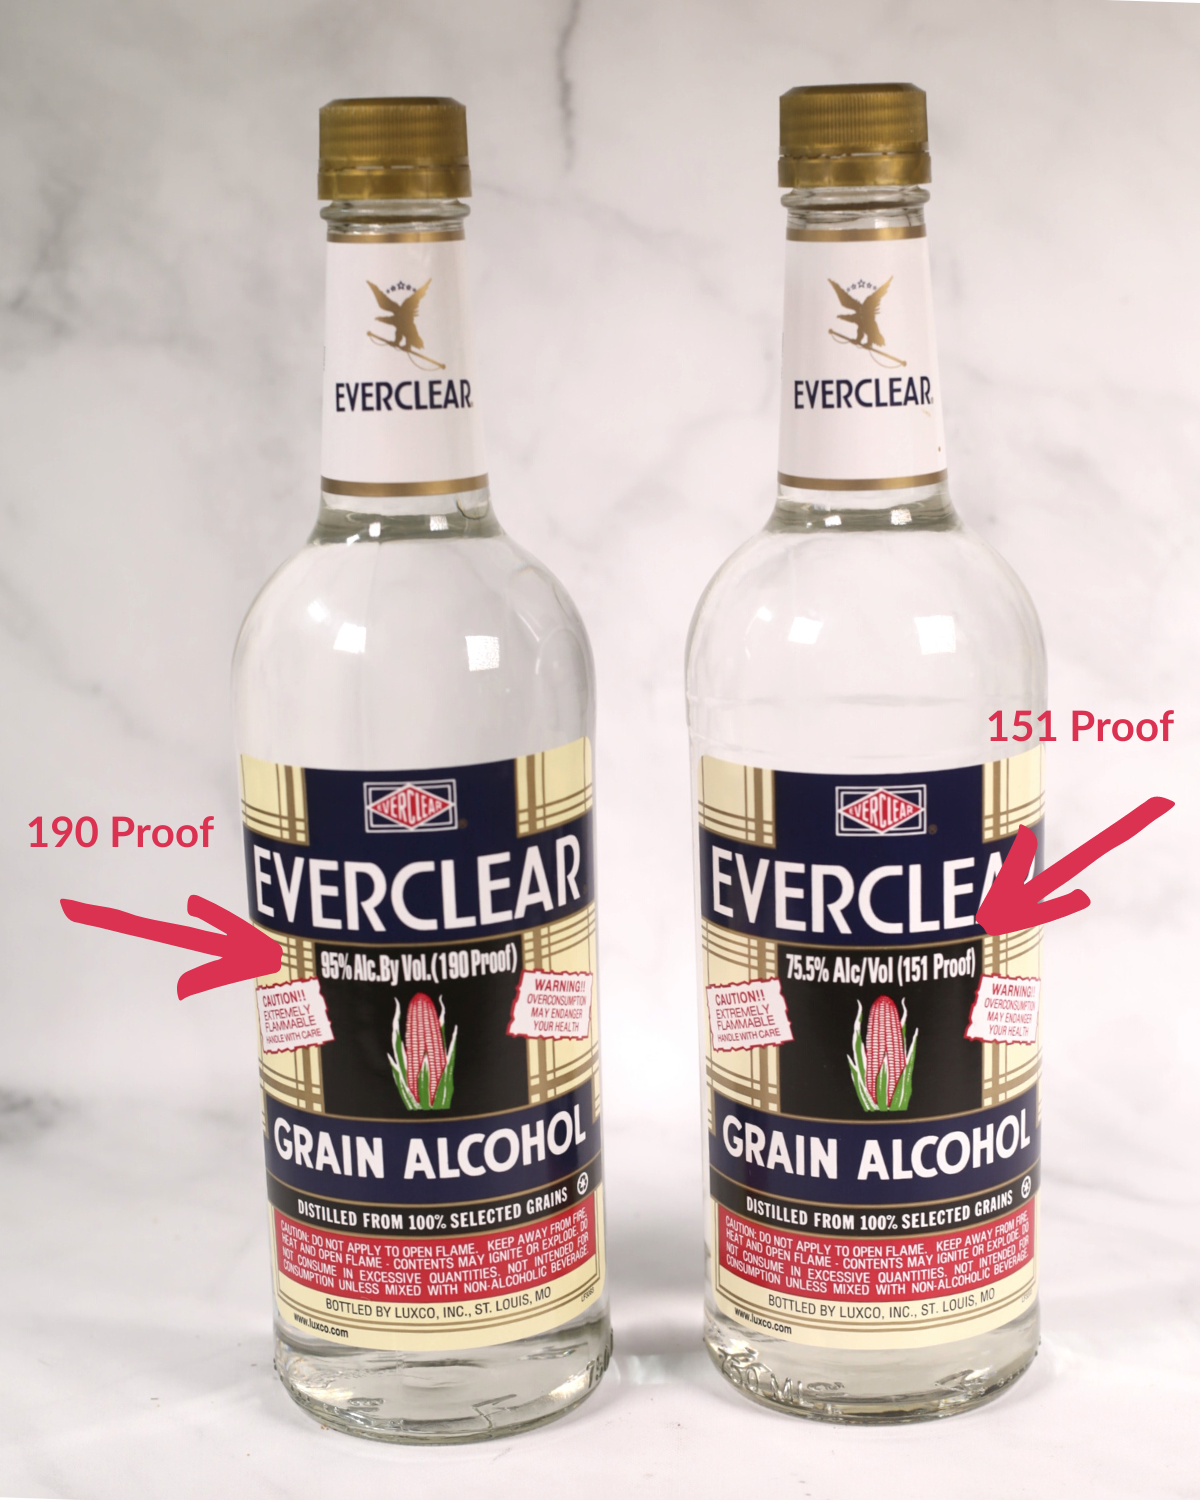 Bottles of Everclear grain alcohol showing the proof.